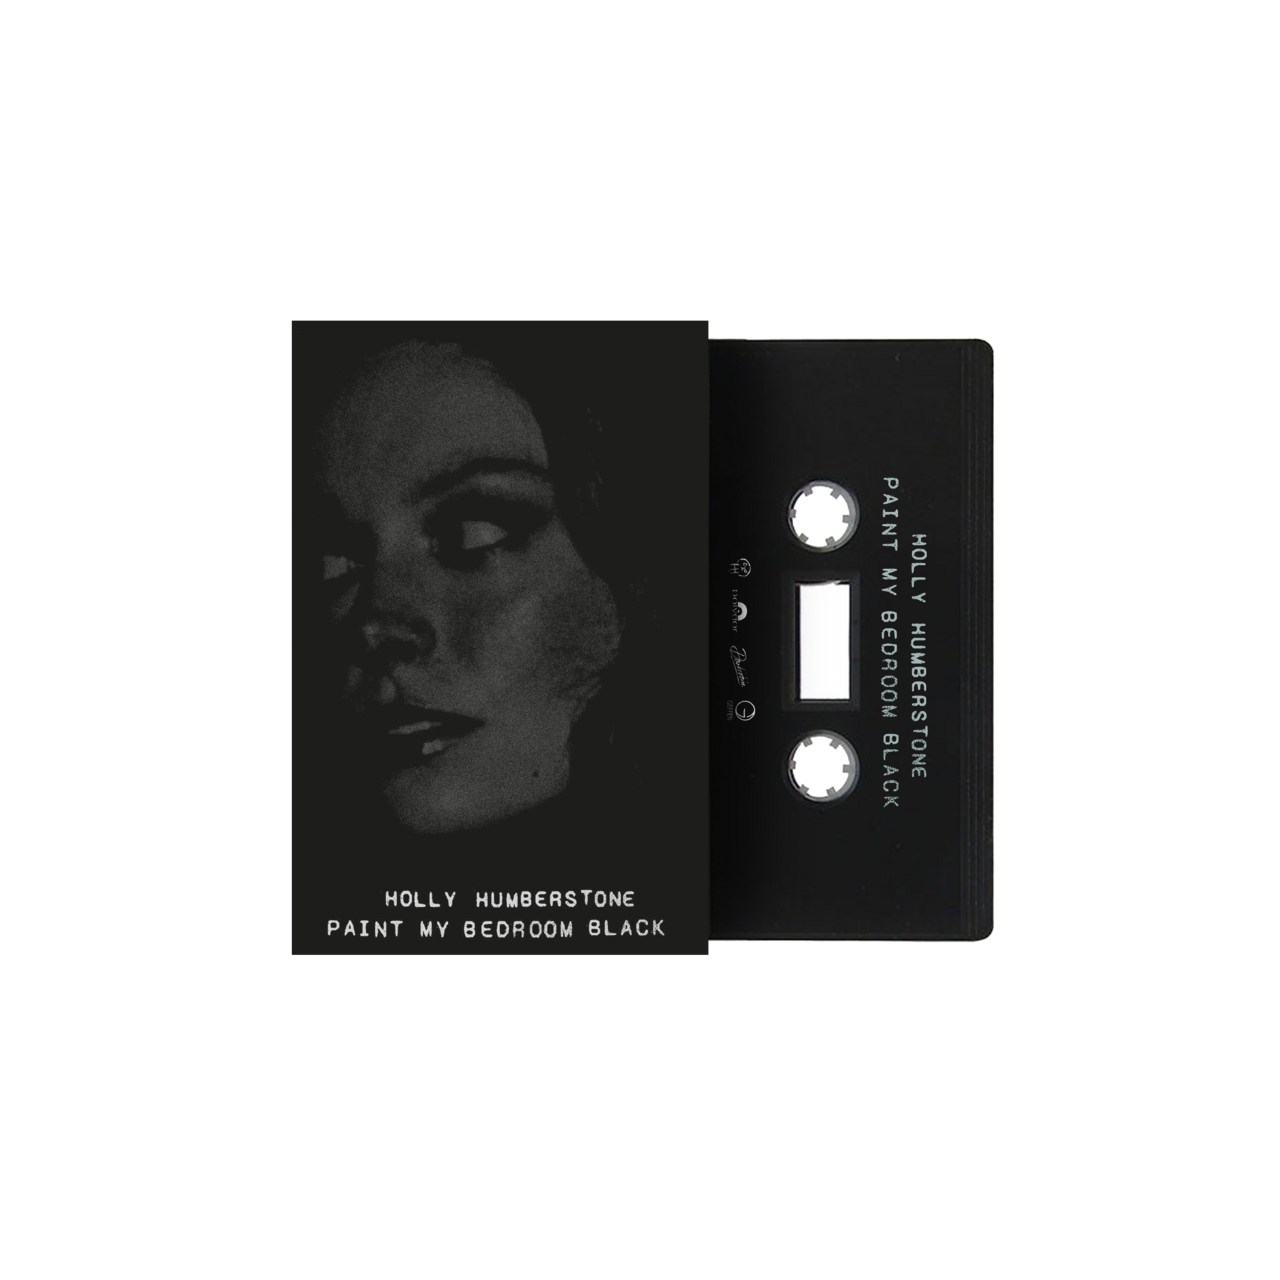 Holly Humberstone - Paint My Bedroom Black (Voicenotes) Cassette #2